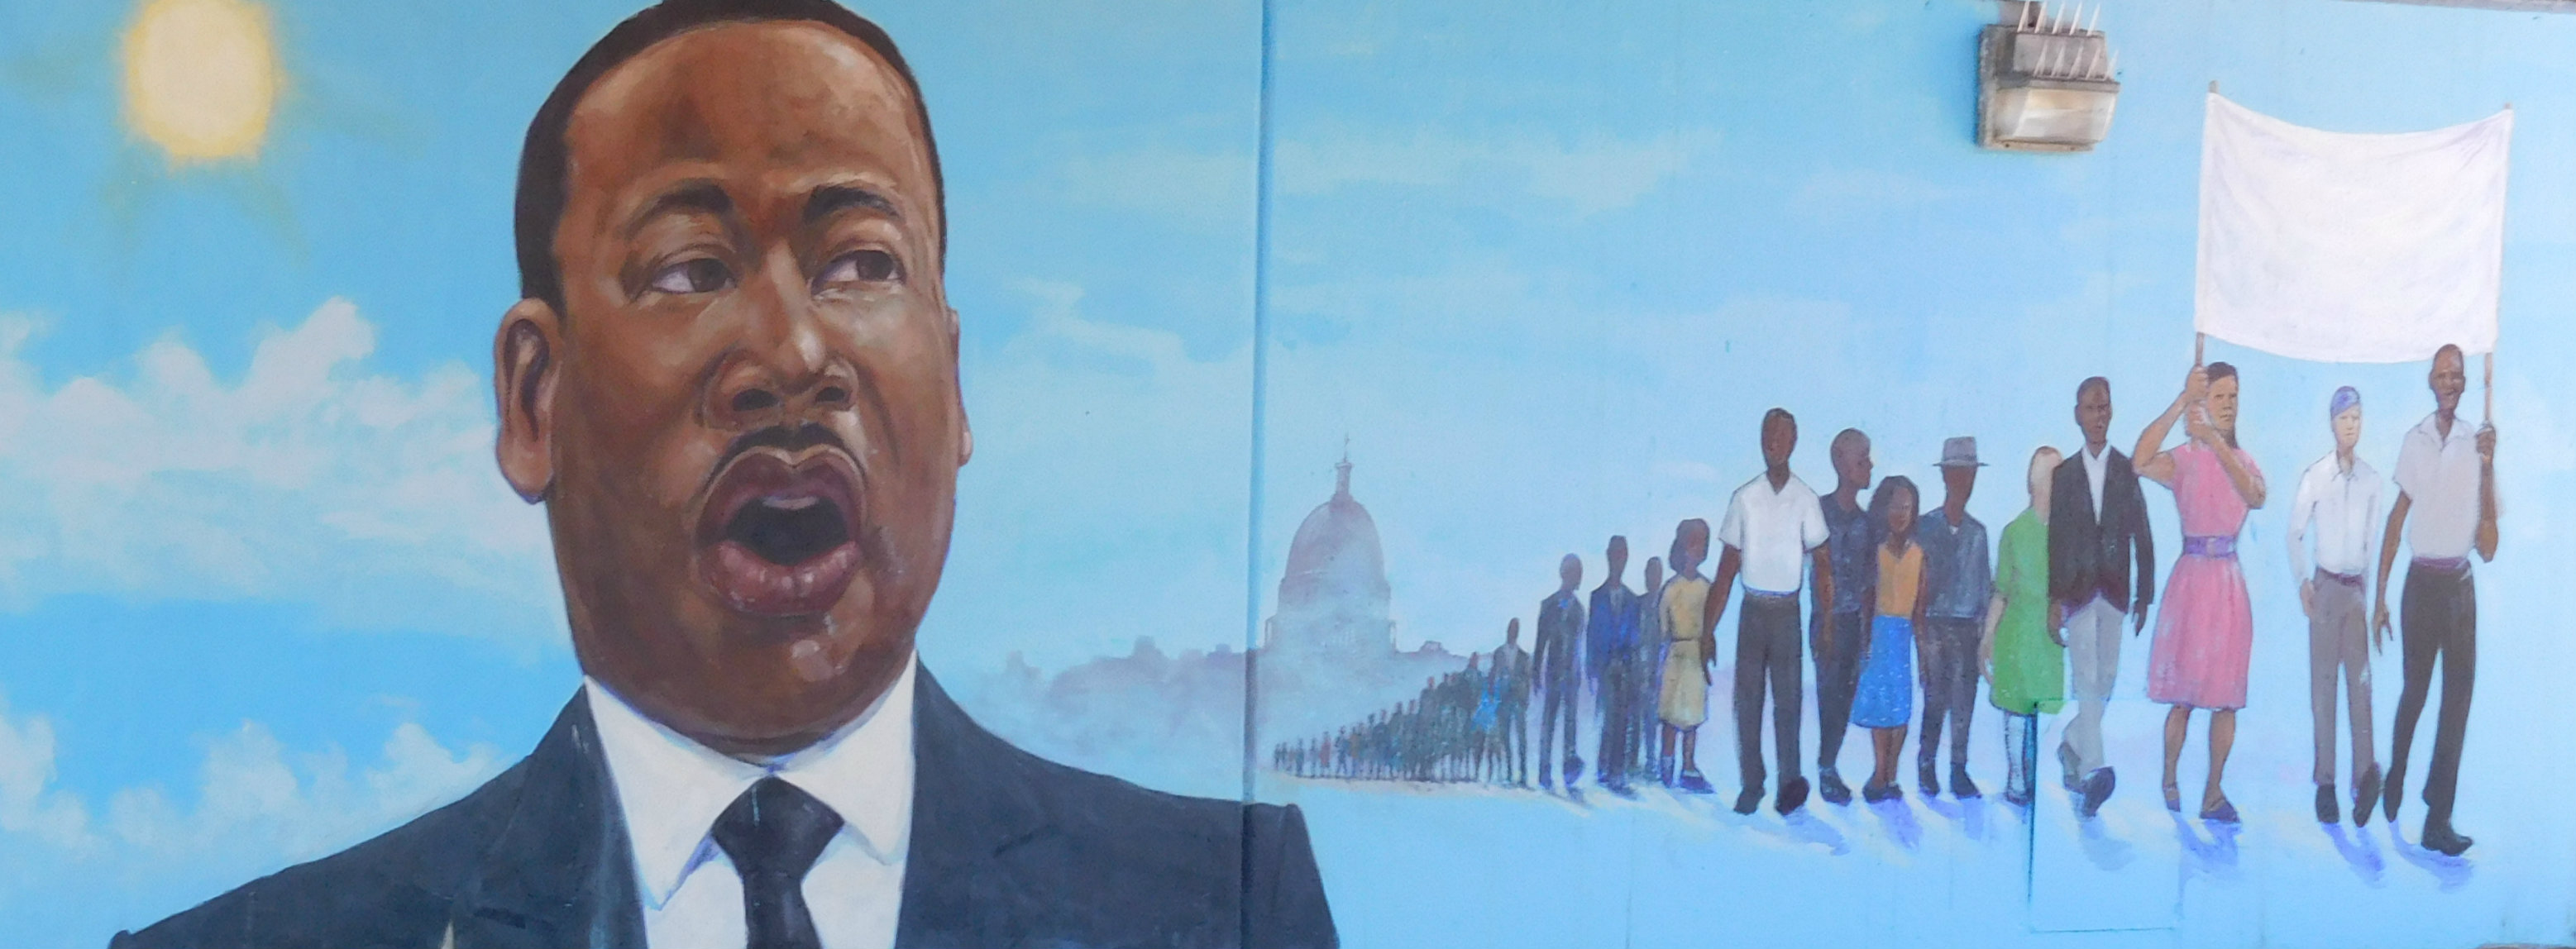 Across from the Douglass mural there will be one of Dr. Martin Luther King.